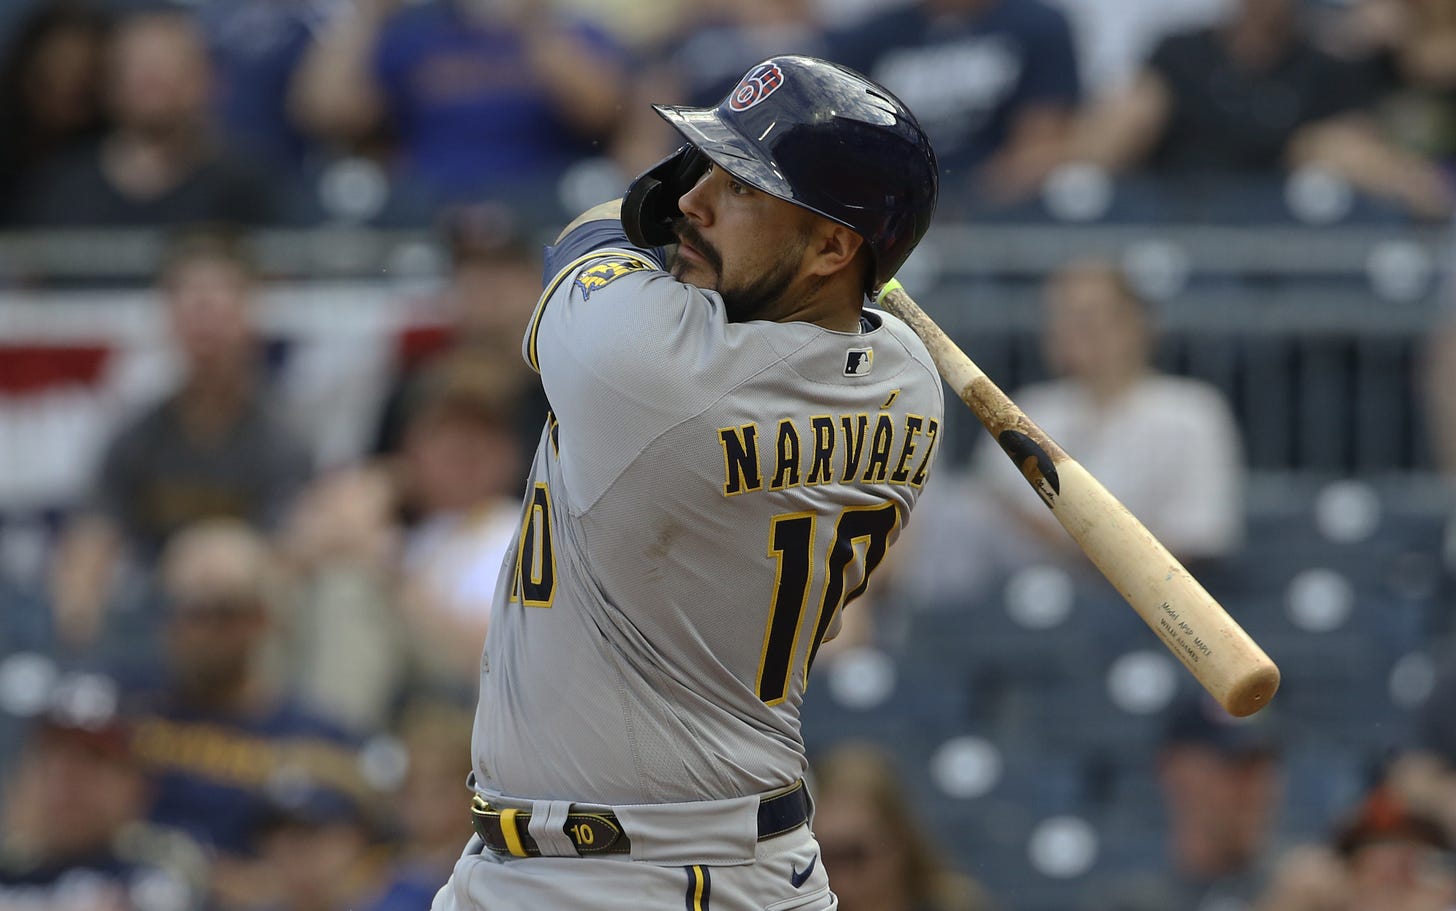 Omar Narvaez's 5-hit day helps Brewers rout Pirates | Reuters